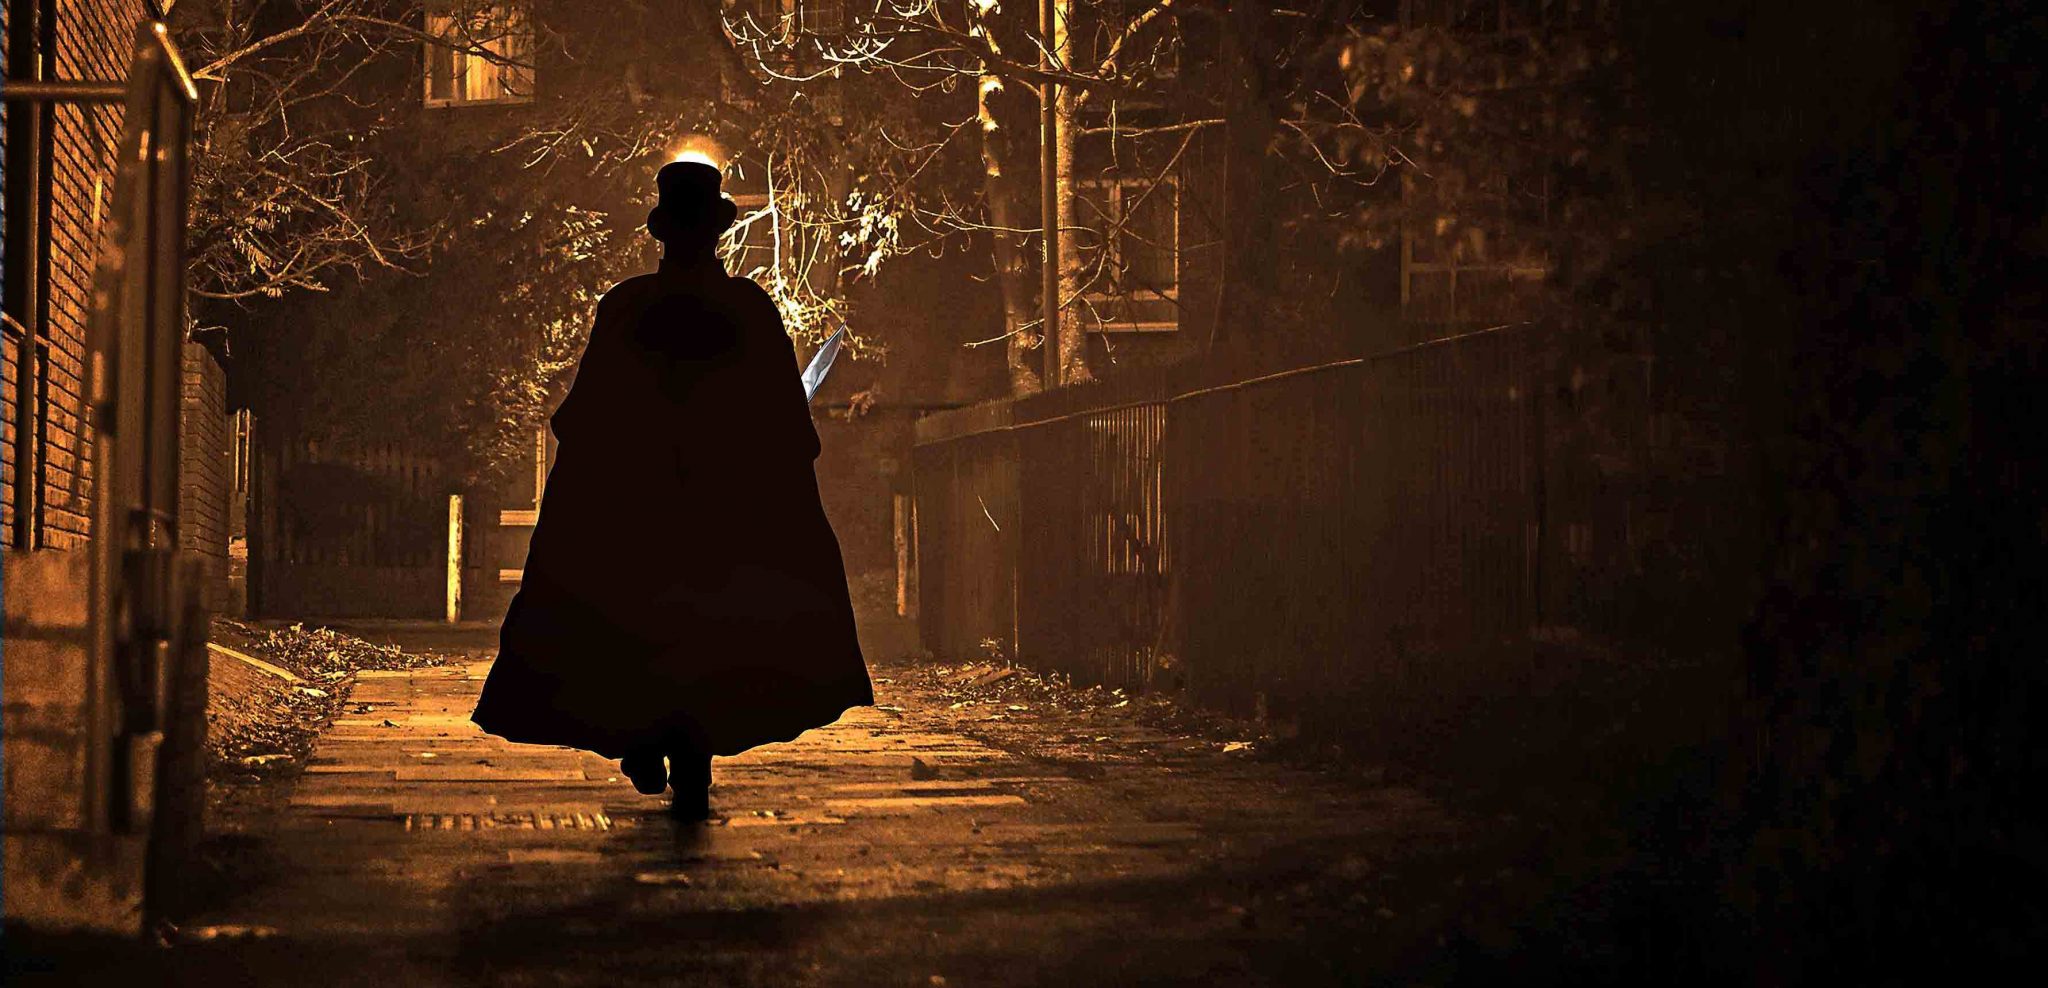 JACK THE RIPPER, The Hellfire Caves & The Devil